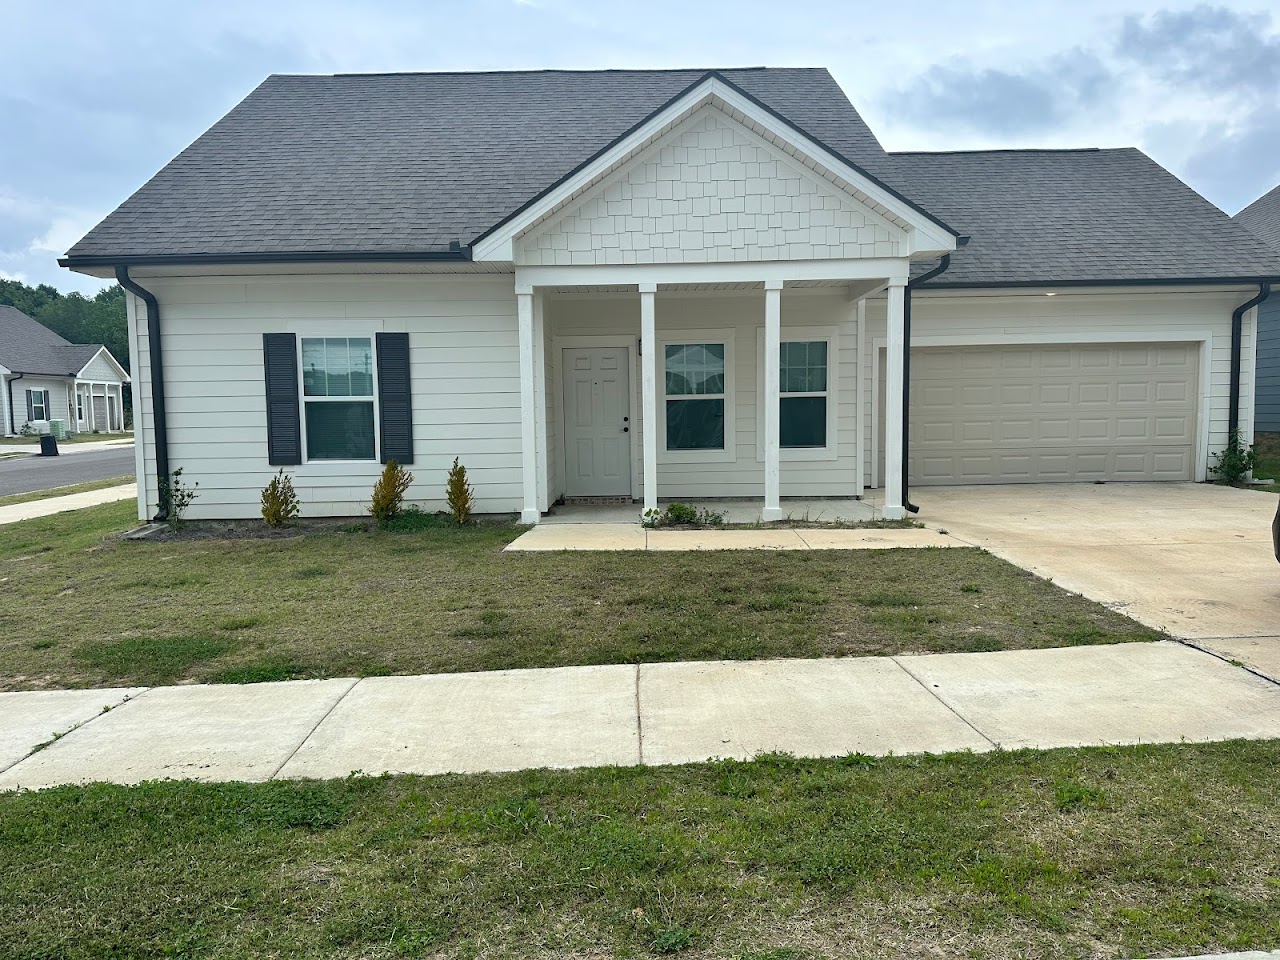 Photo of CLARK GROVE. Affordable housing located at REED RD AND WESTSIDE RD STARKVILLE, MS 39759